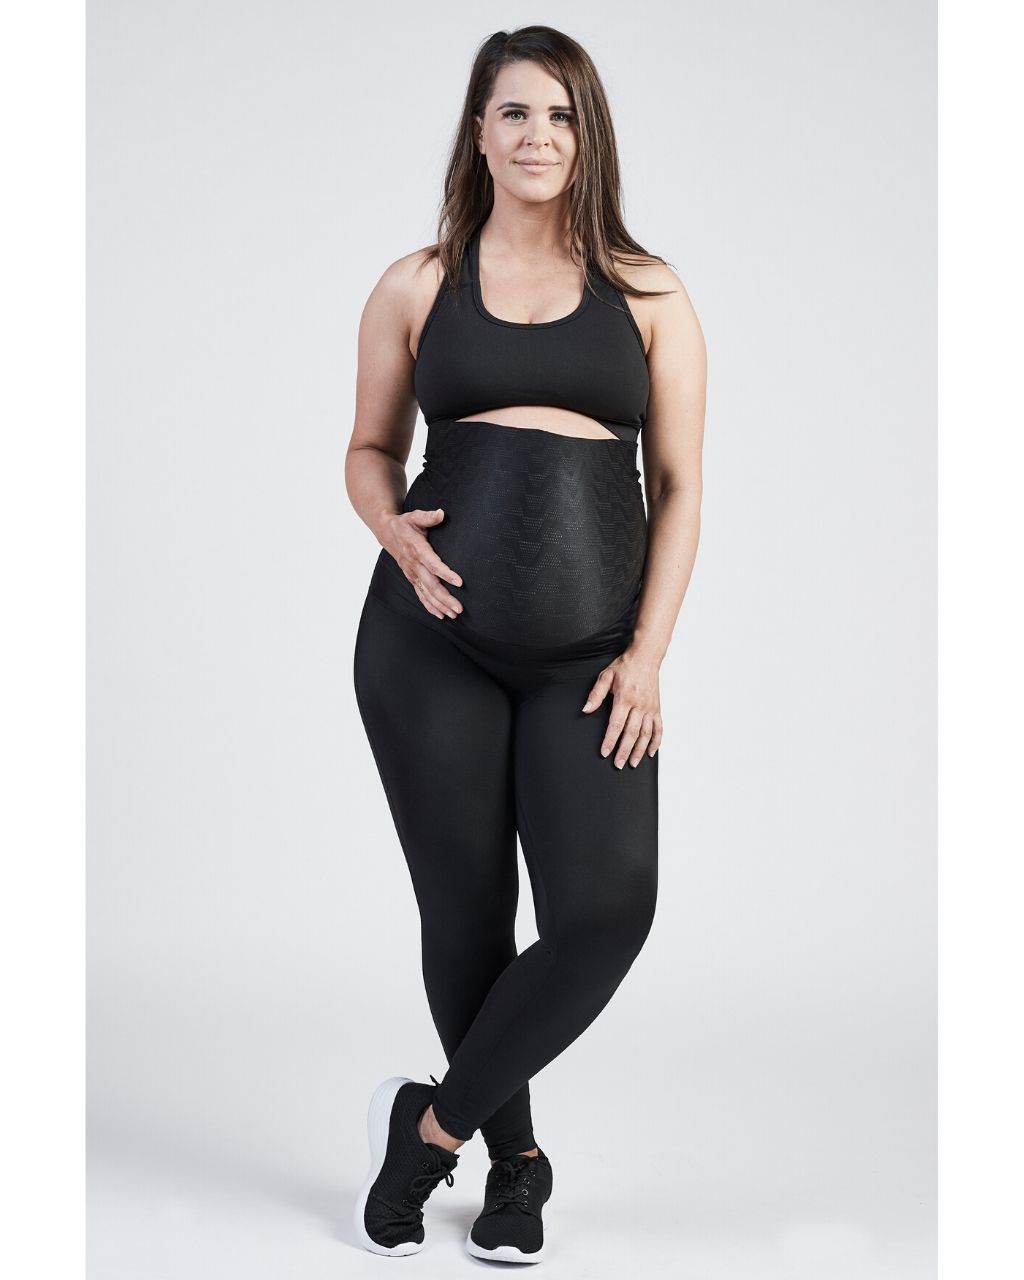 SRC, Recovery, Leggings, Support